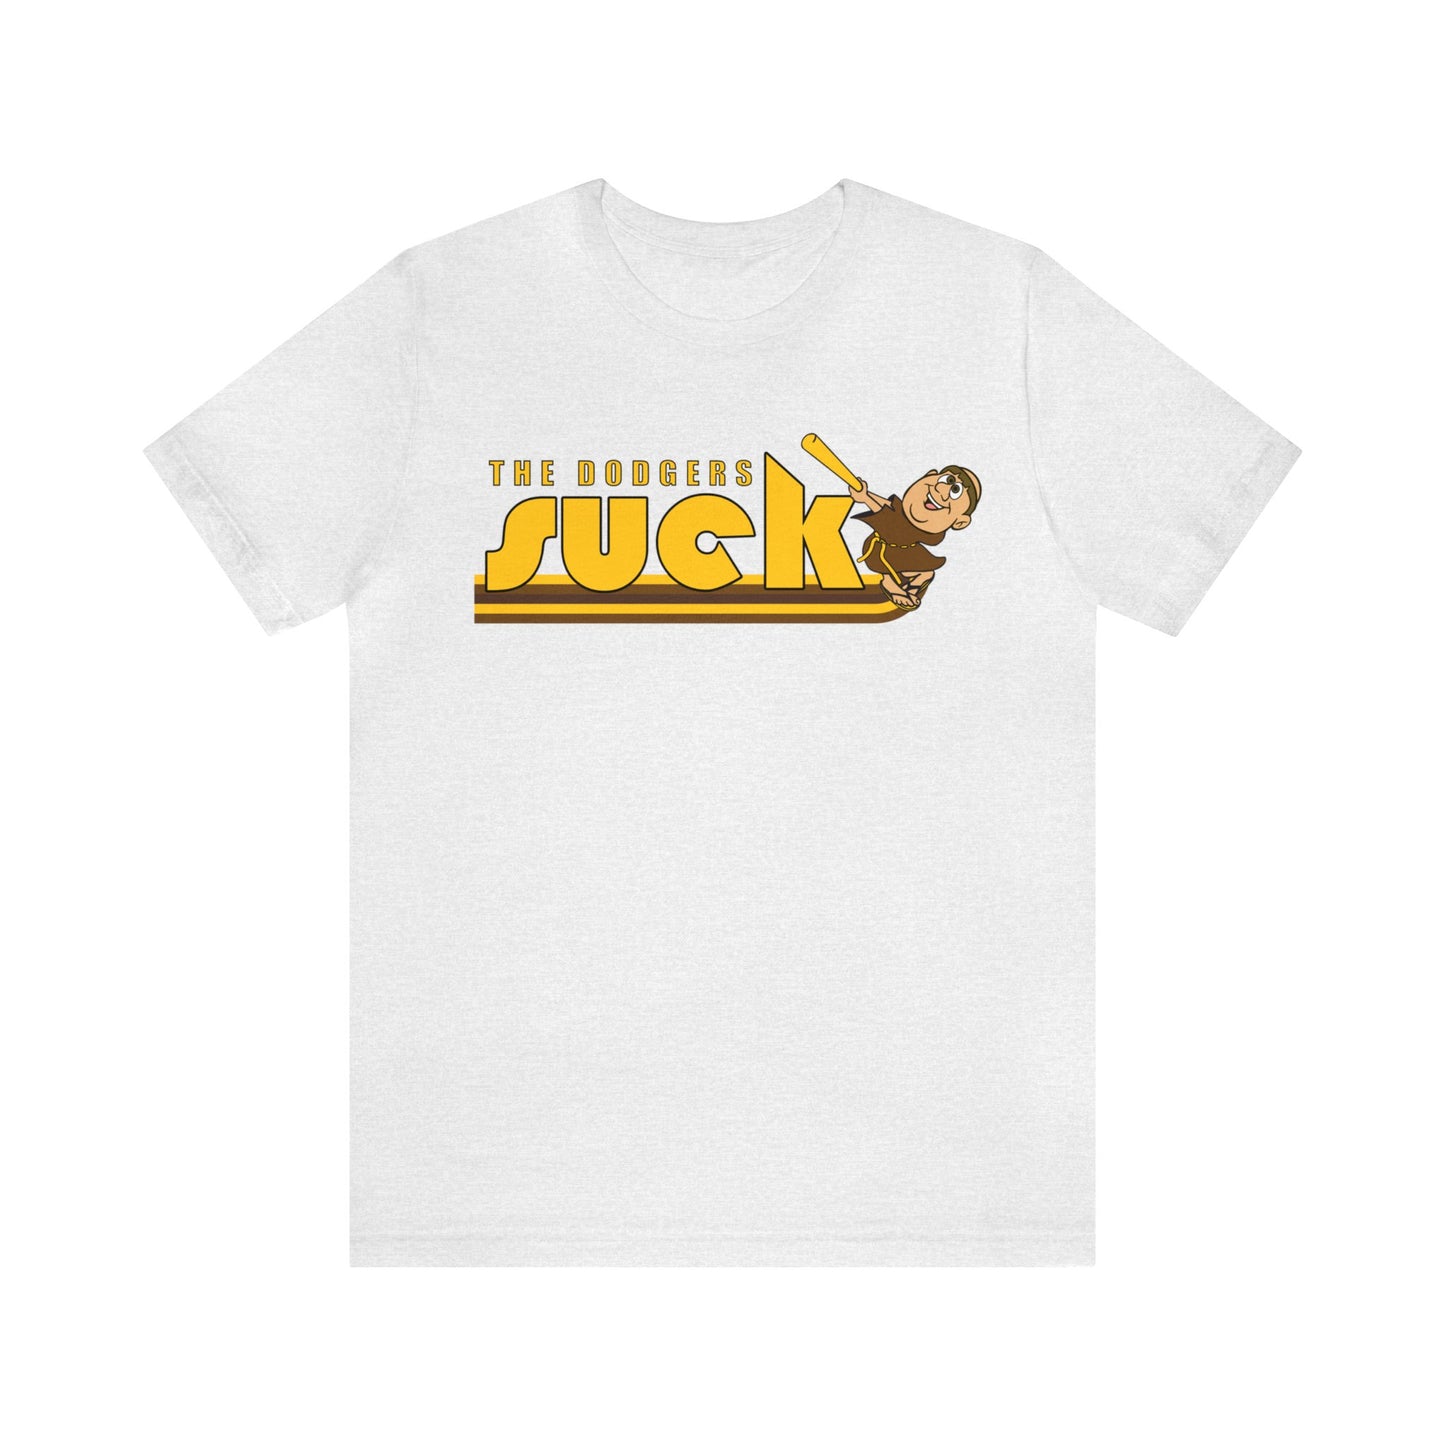 El Aye Dawjers Suck (for San Diego Padres fans) - Unisex Jersey Short Sleeve Tee